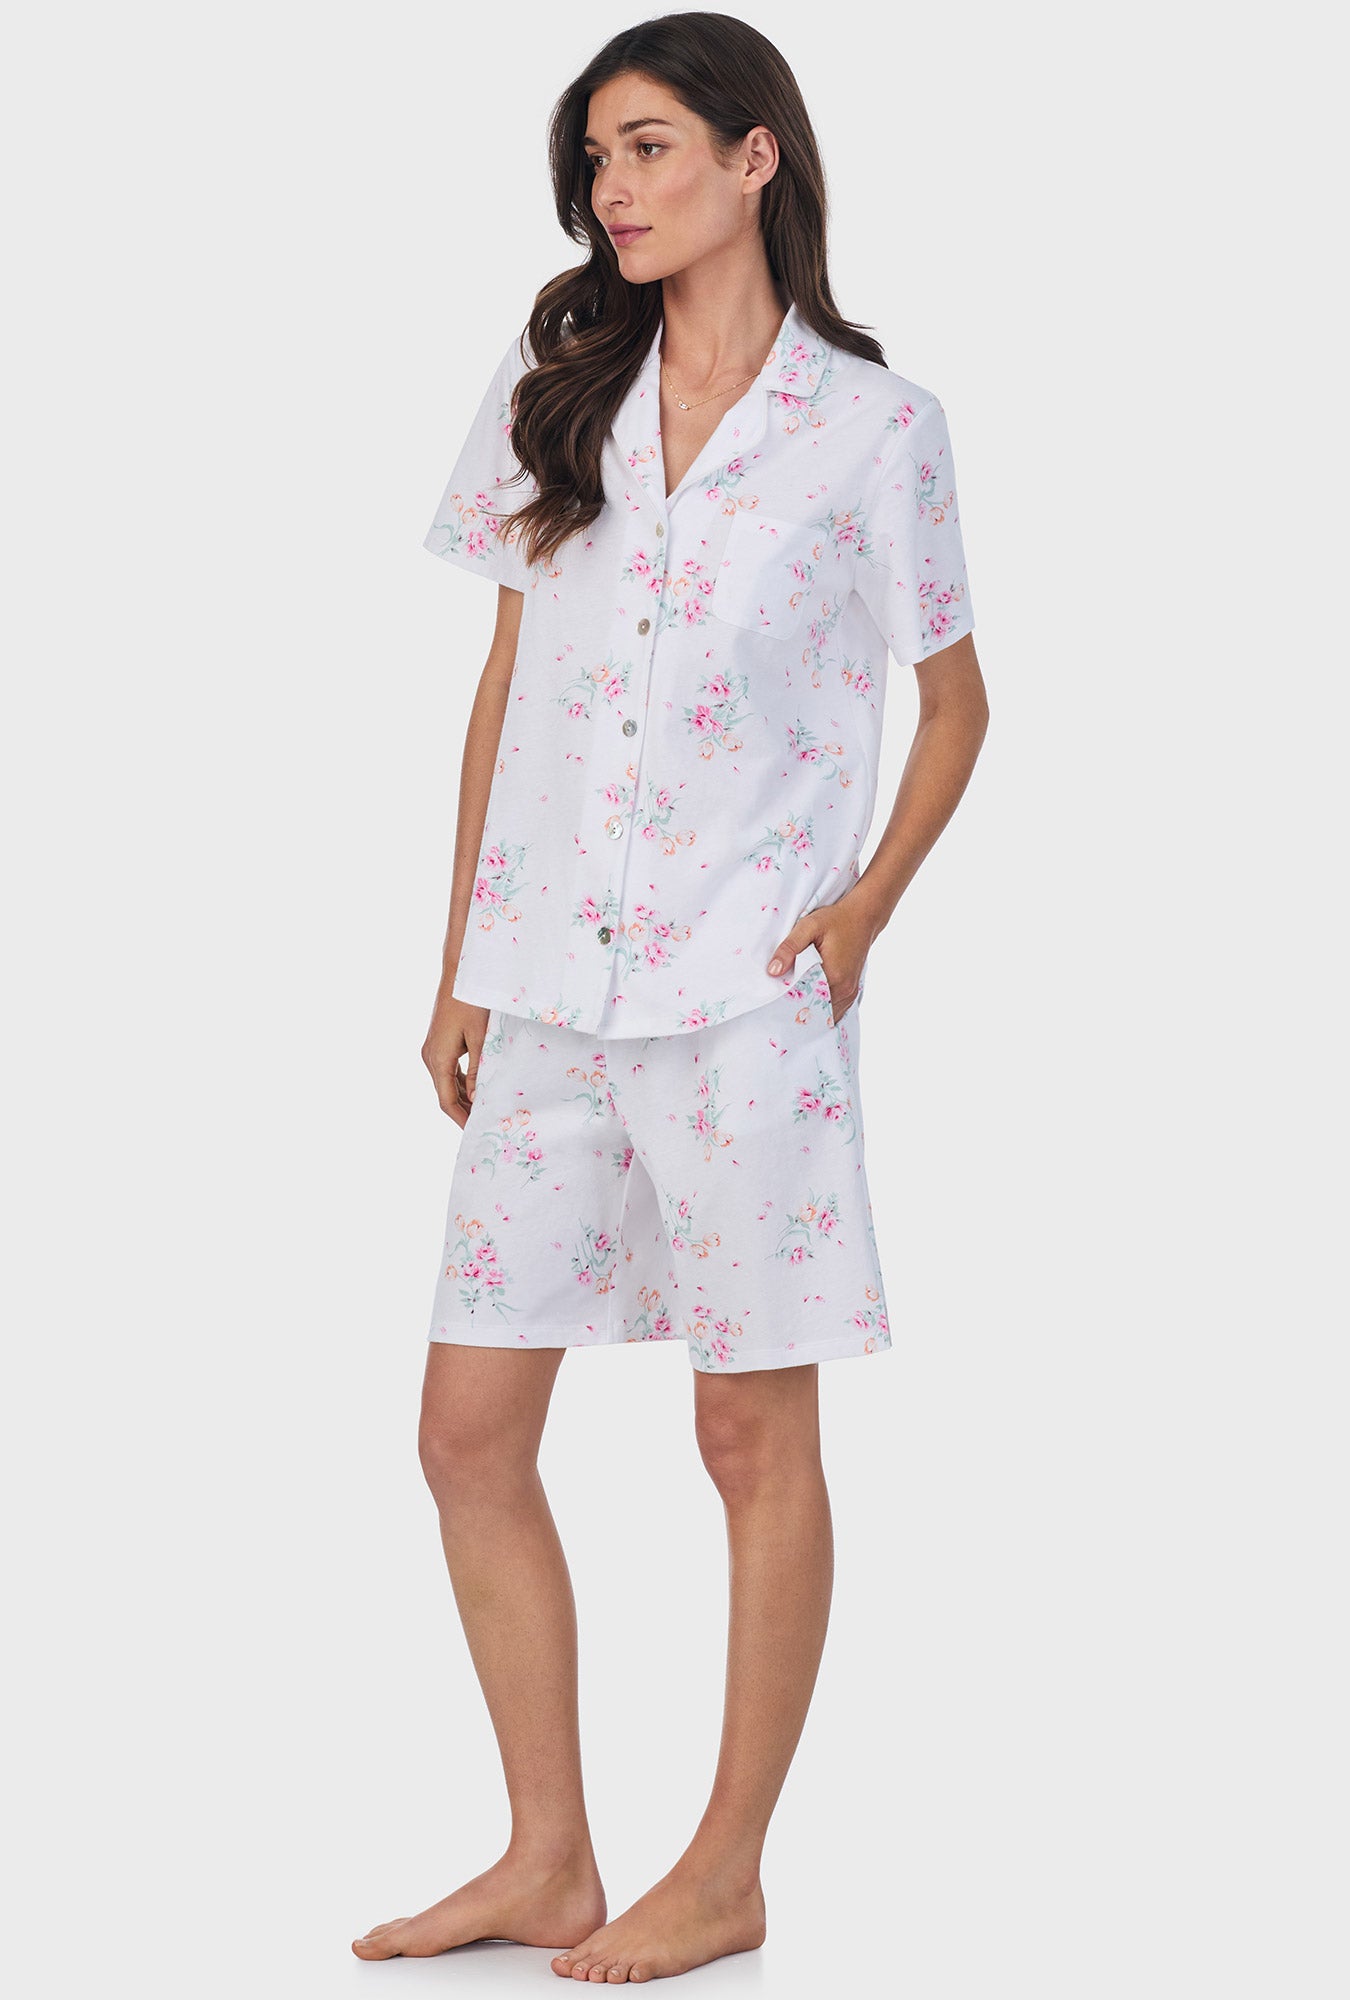 A lady wearing pink short sleeve cotton bermuda pajama set with floral bouquet print.